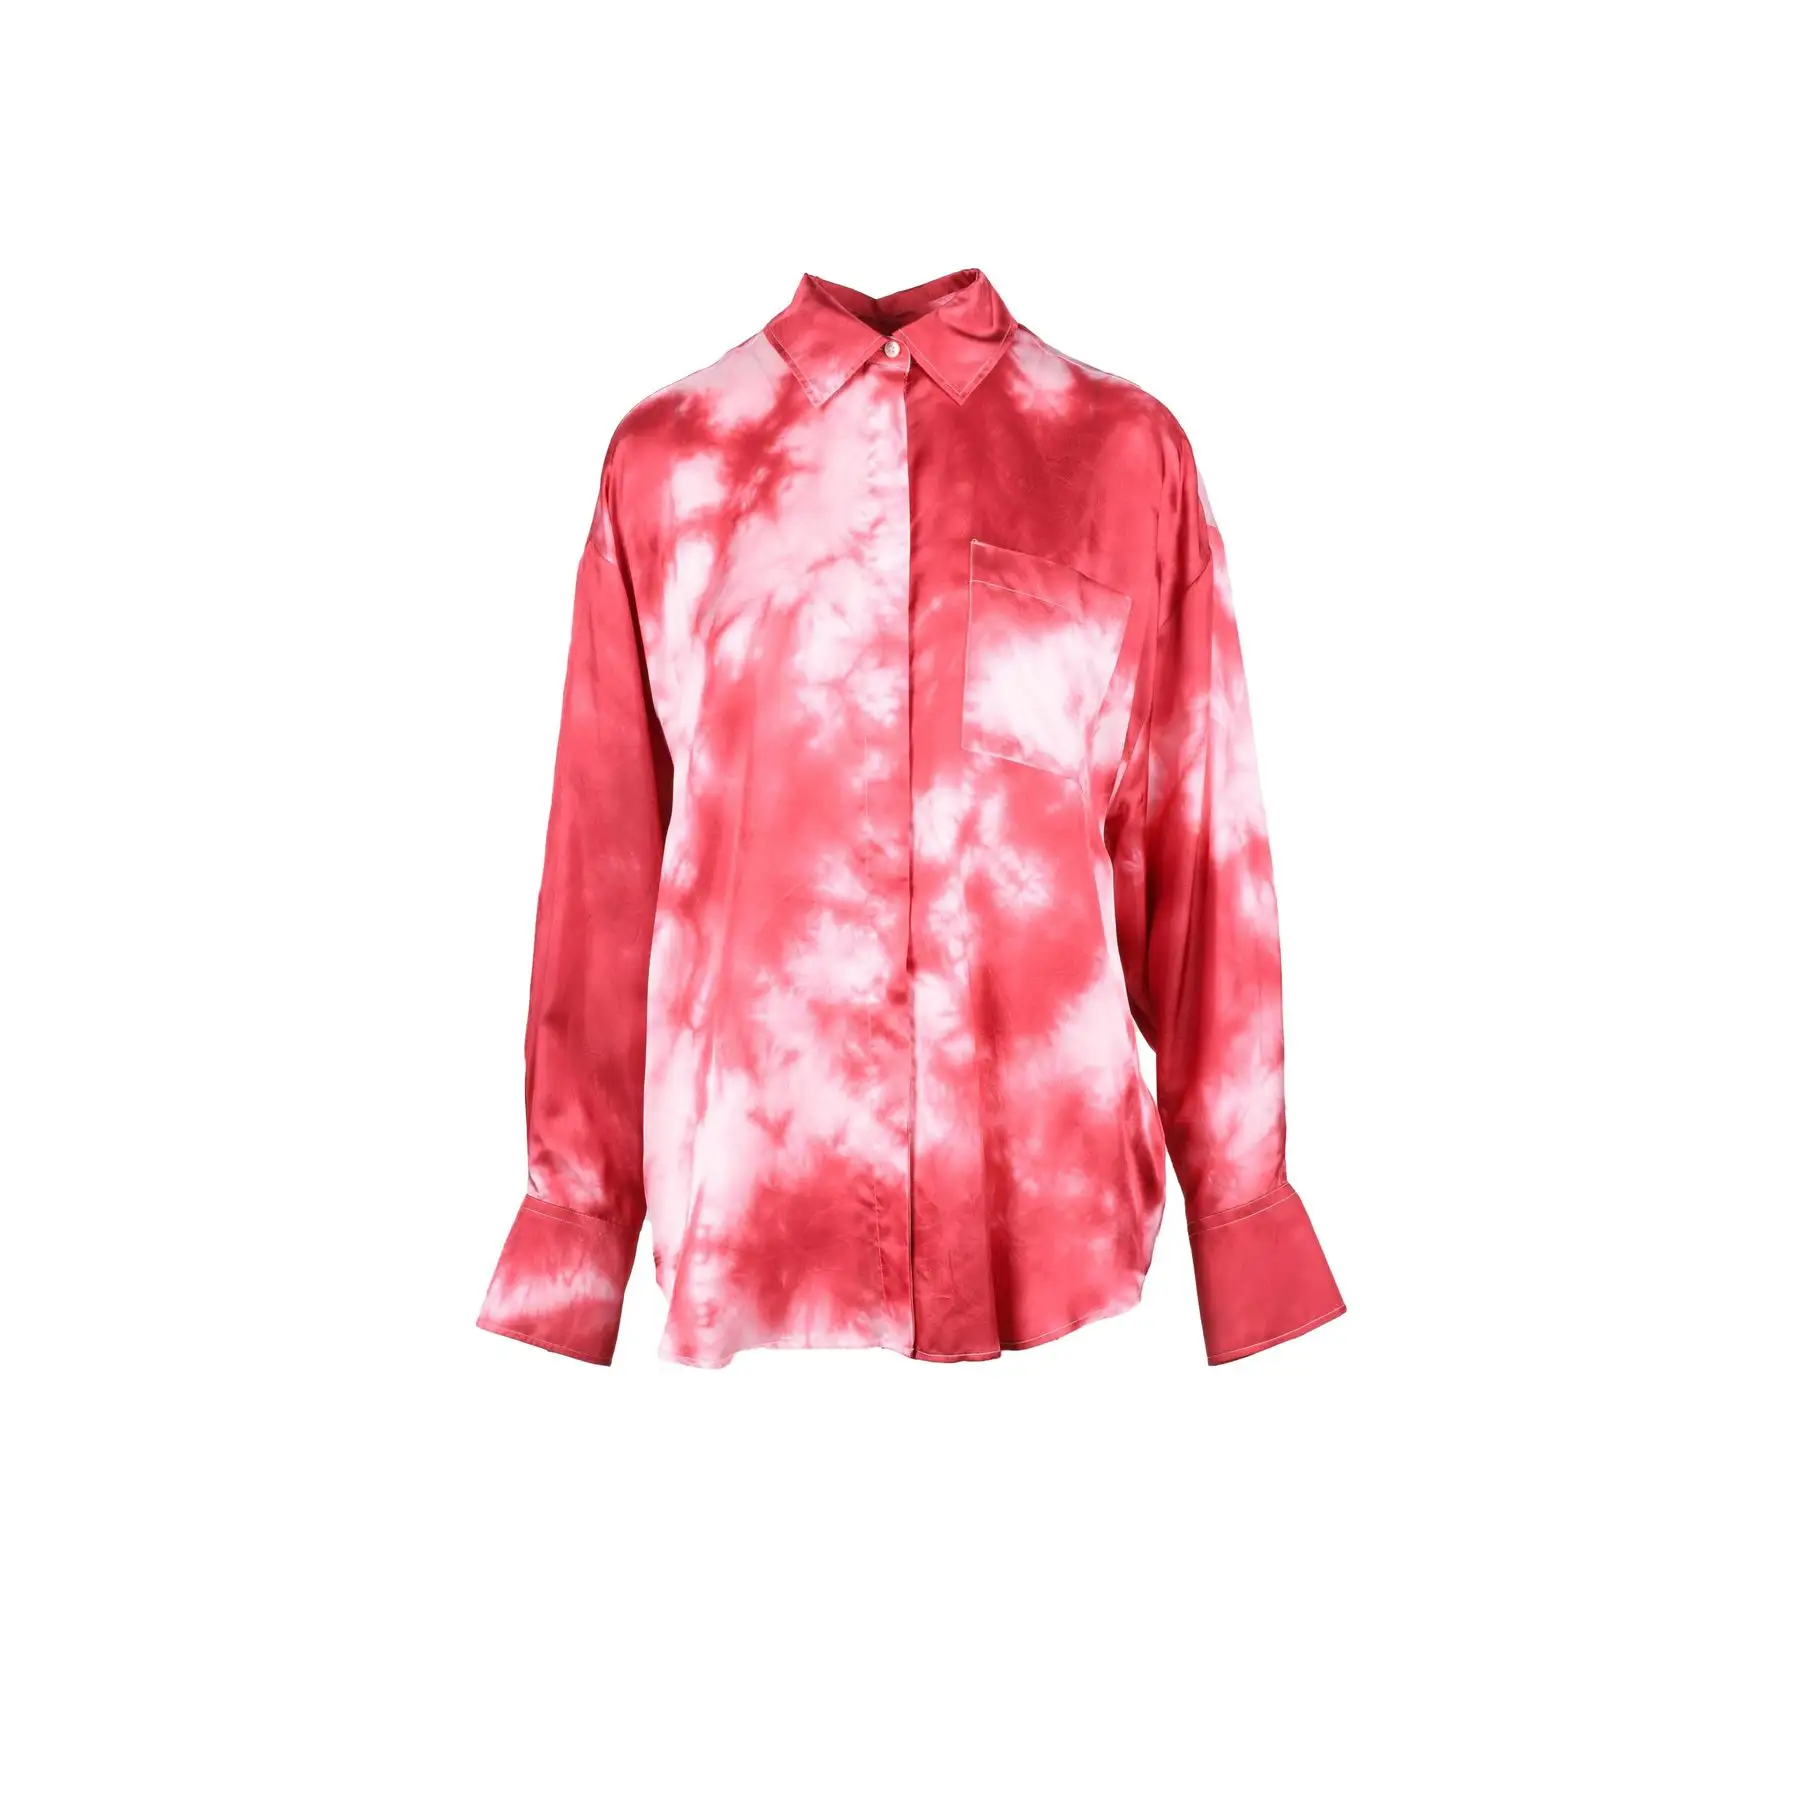 Versatile Women Blouse - Soft Stretch Fabric and Flattering Fit - Transition Seamlessly from Work to Play